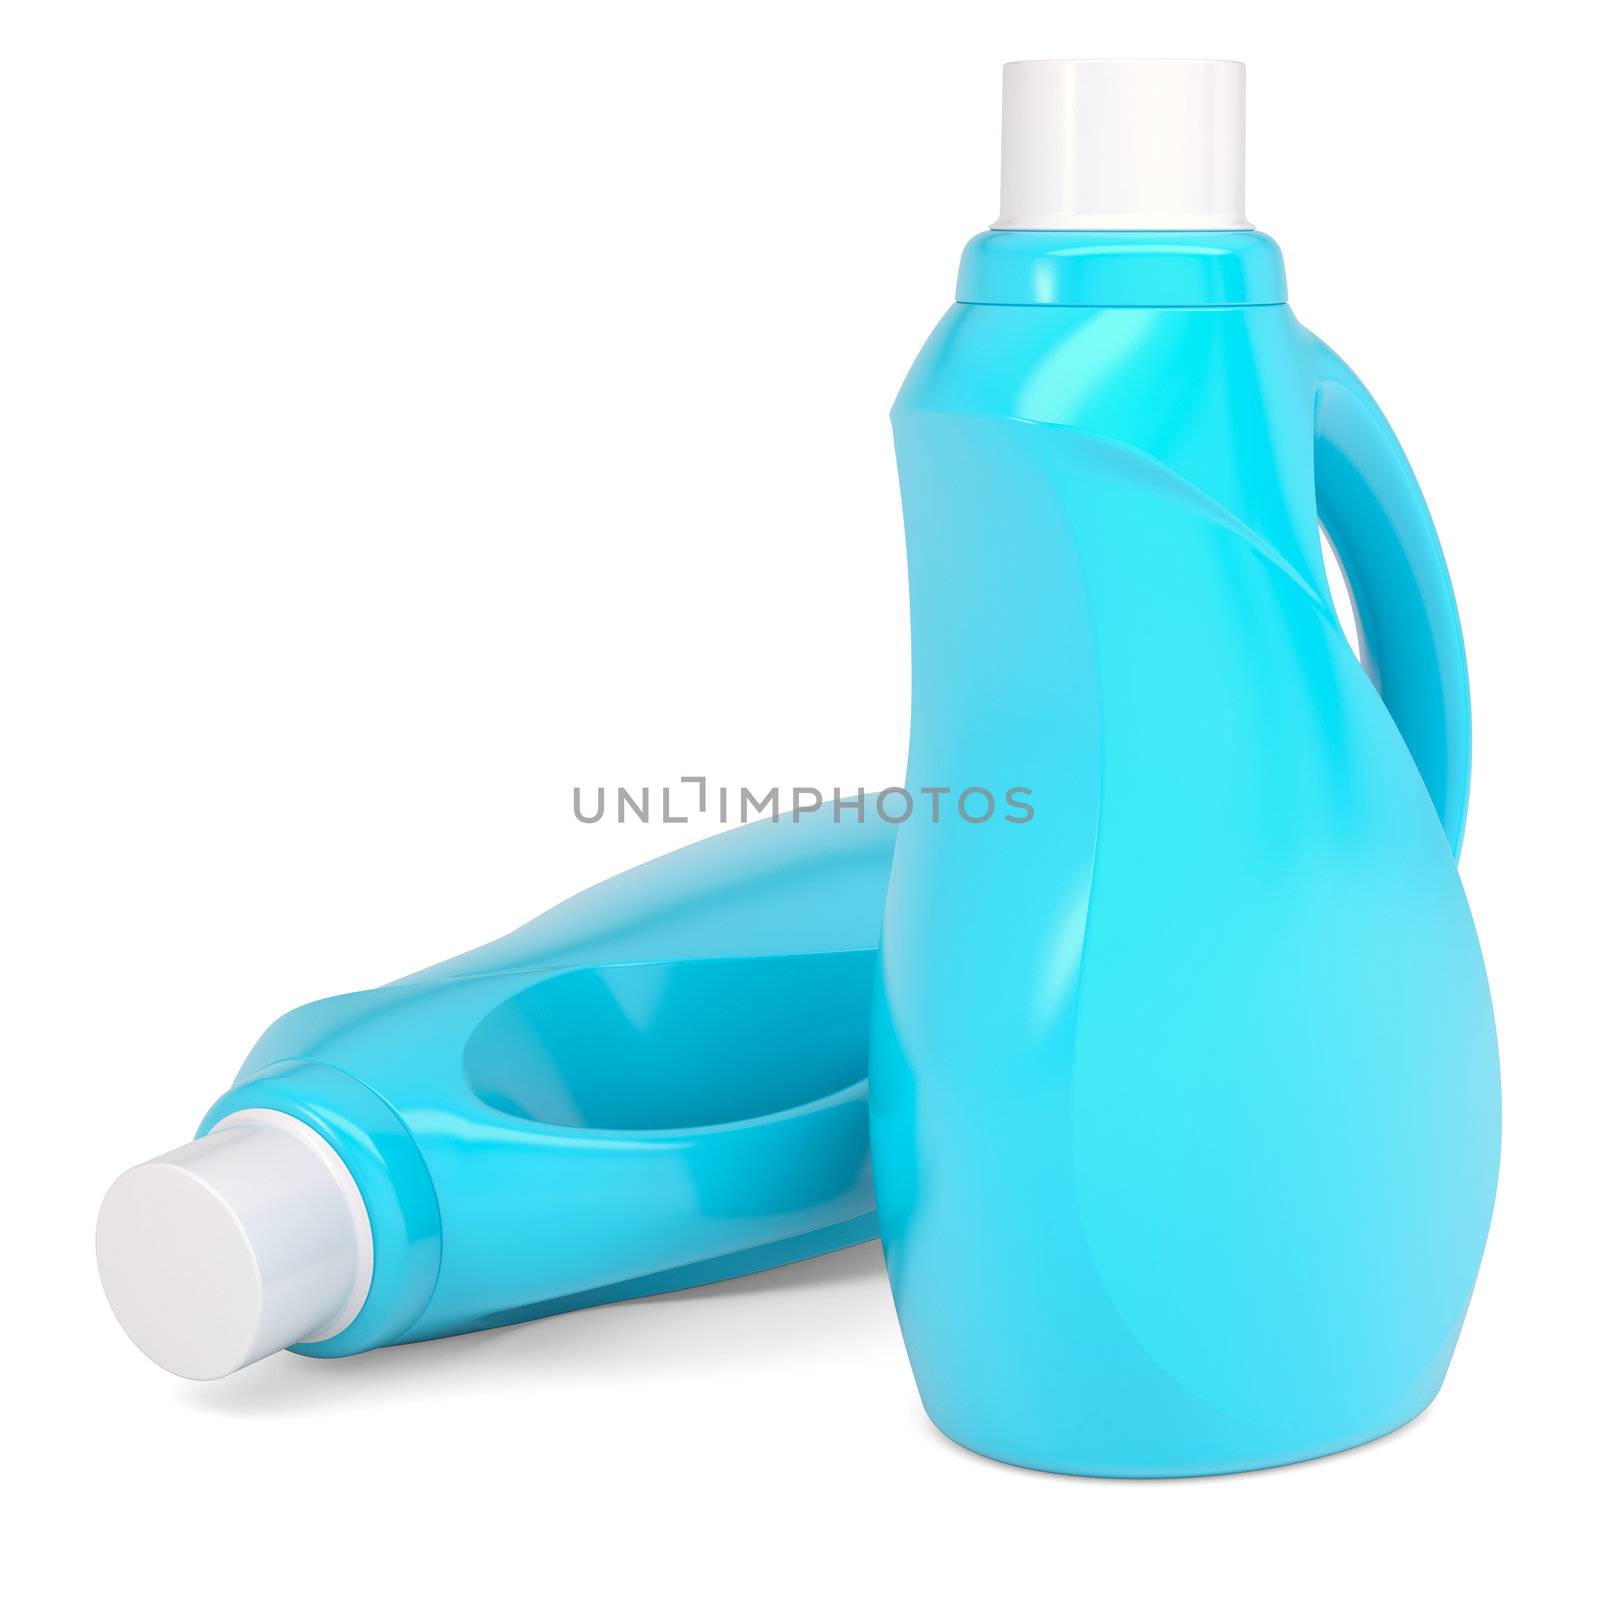 Two plastic bottles of household chemicals. Isolated render on a white background